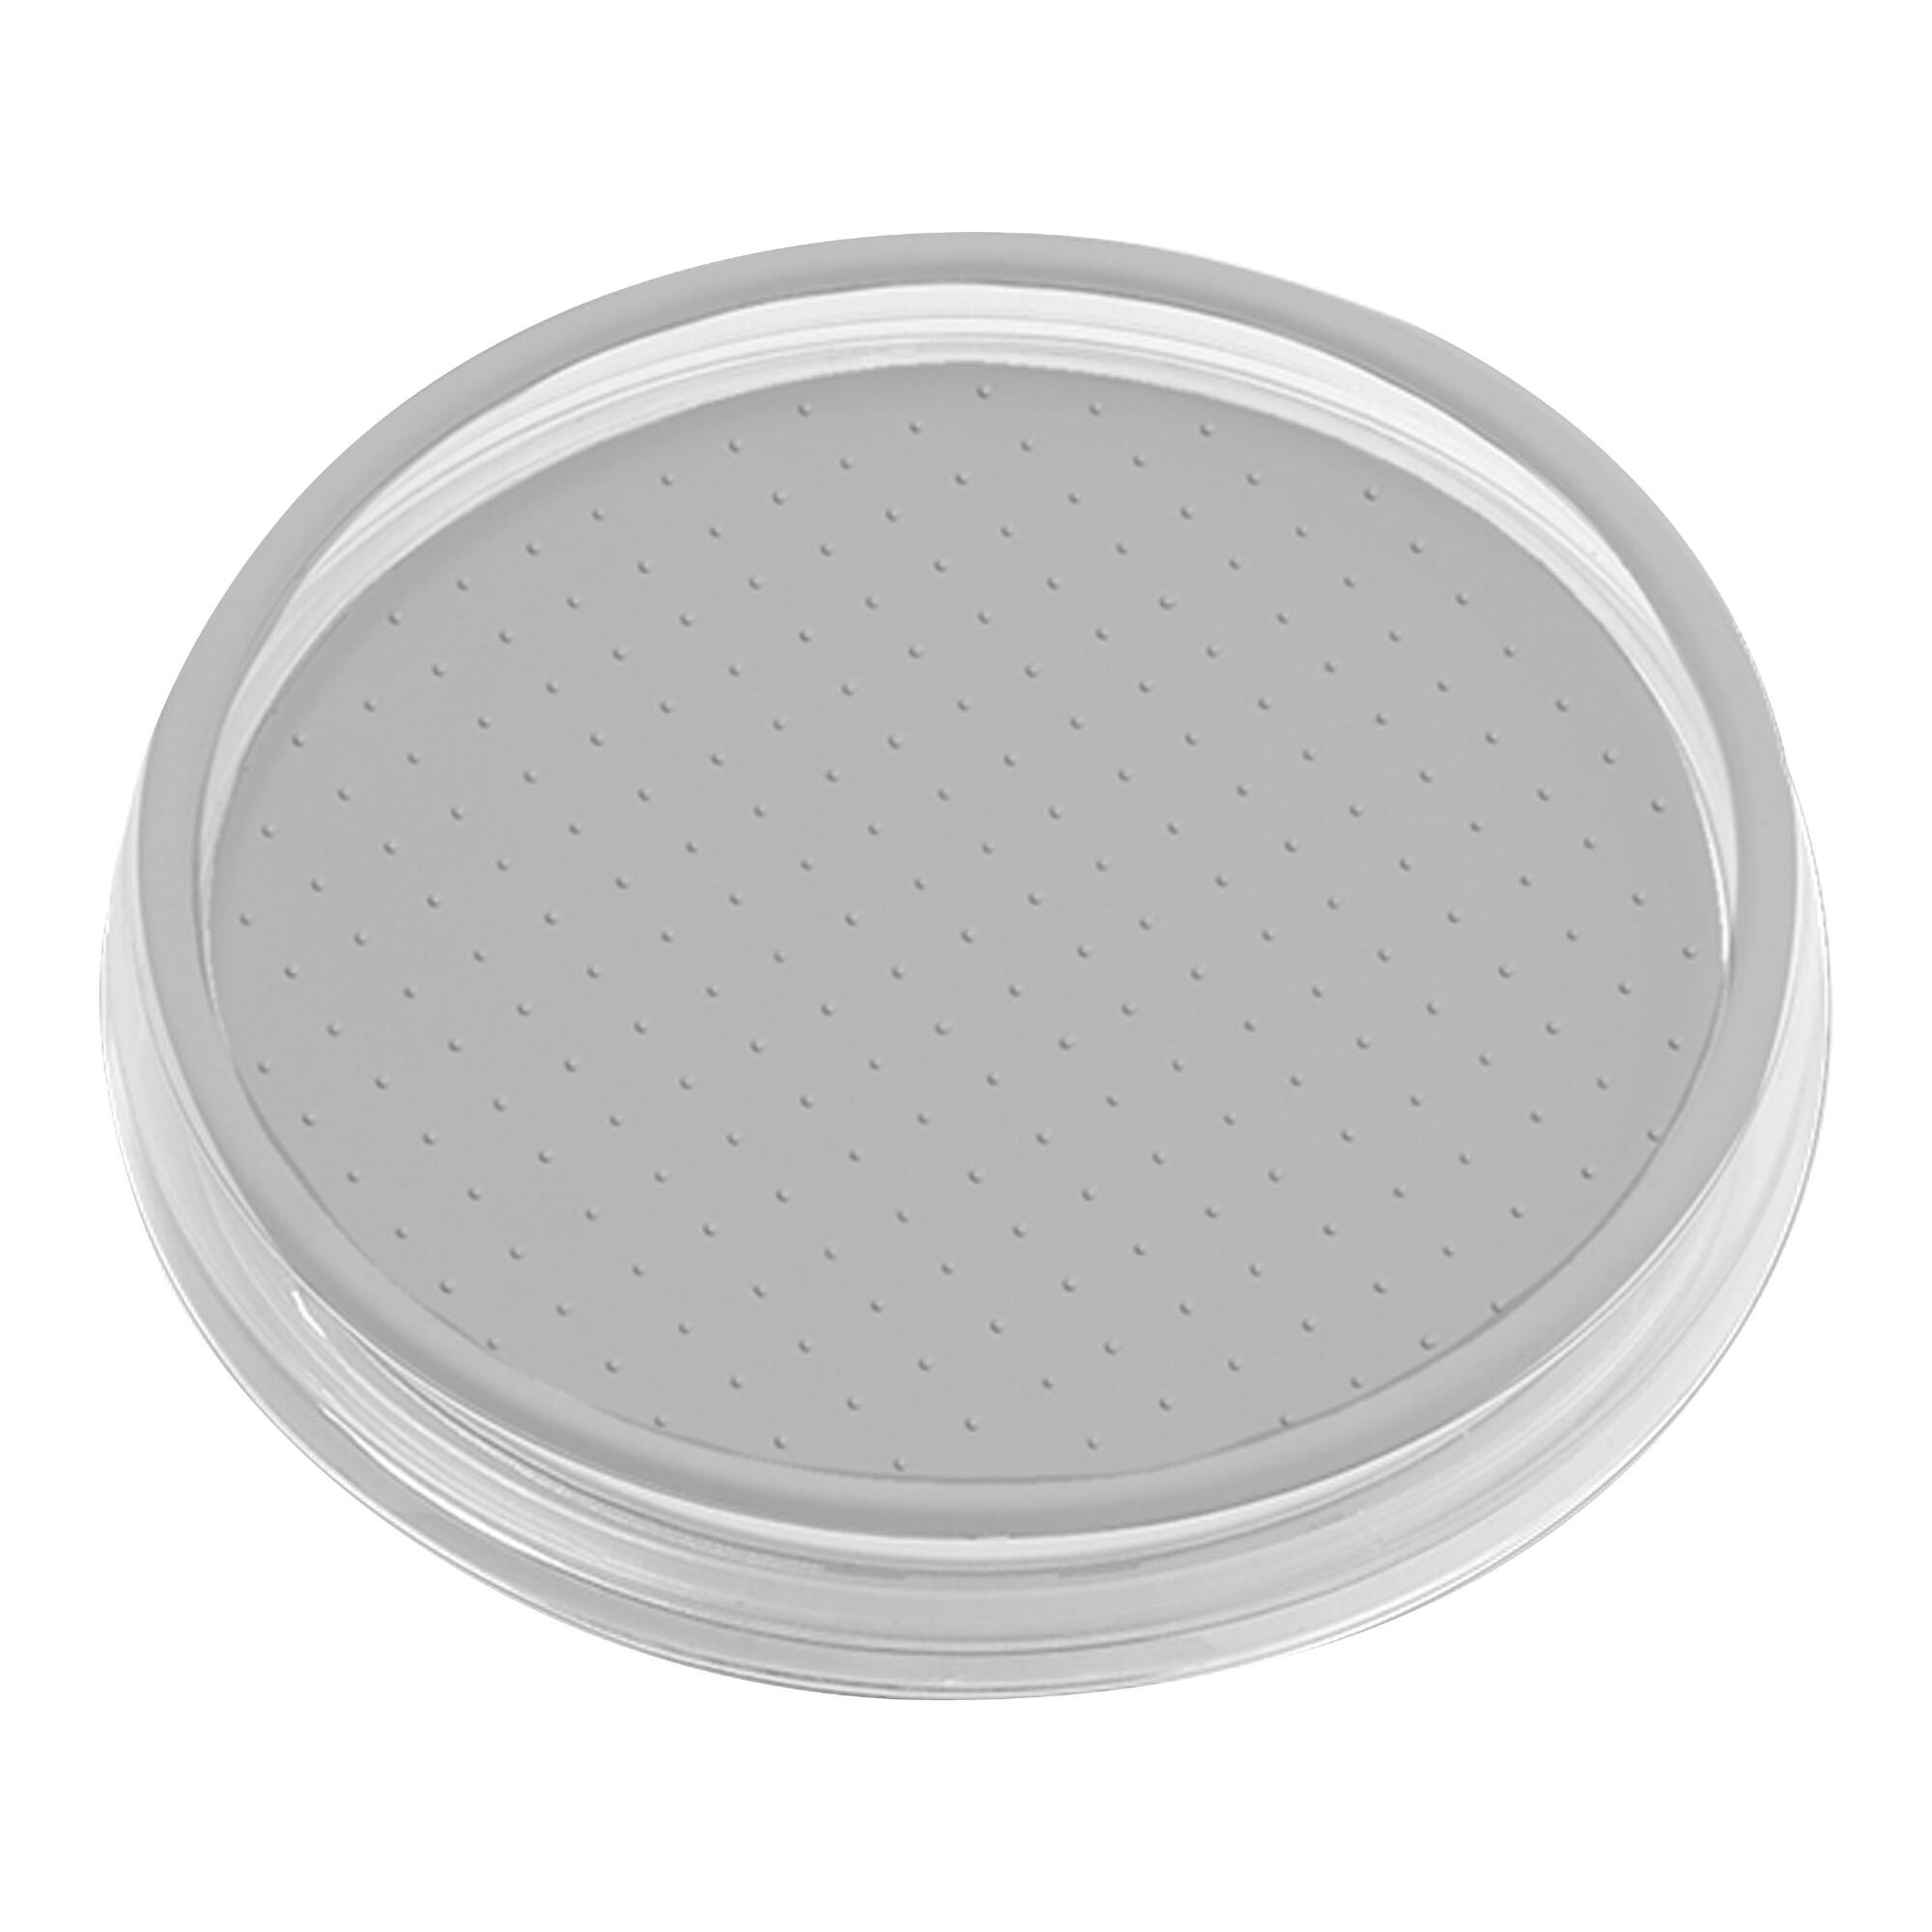 Madesmart Clear Turntable Lazy Susan by World Market